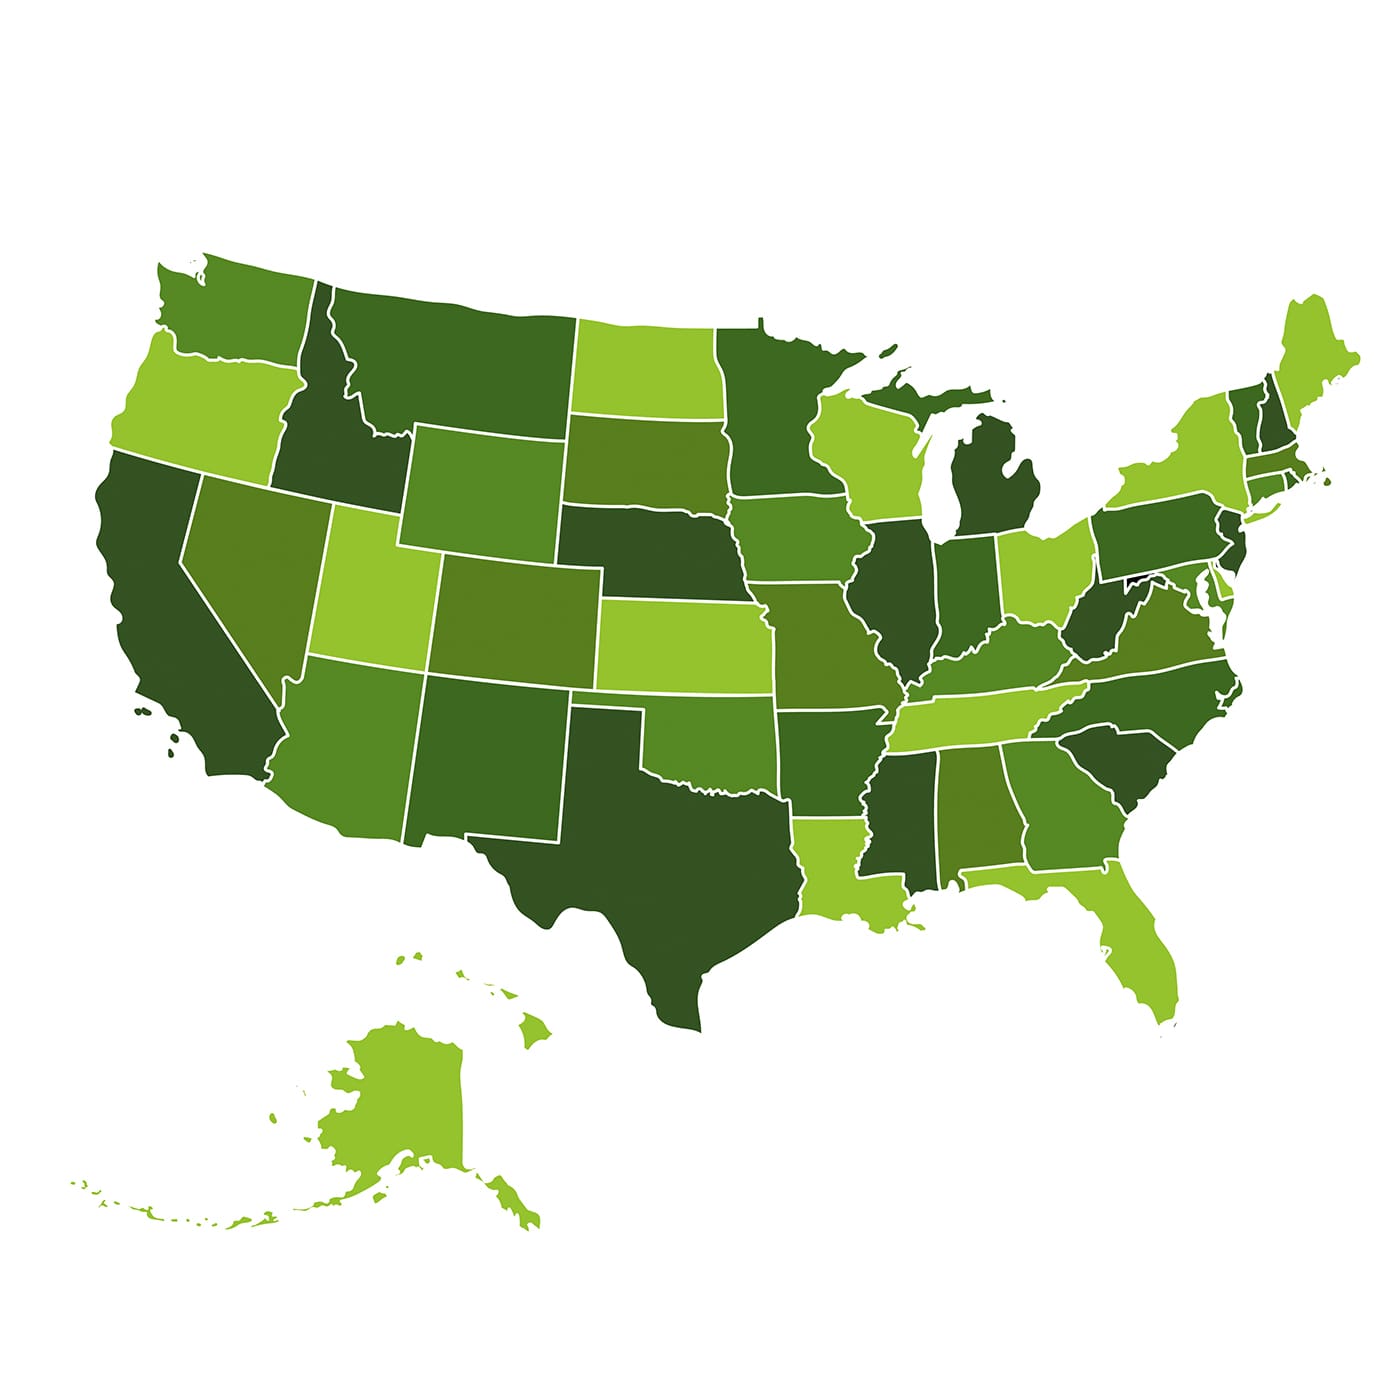 A green map of the U.S.A.